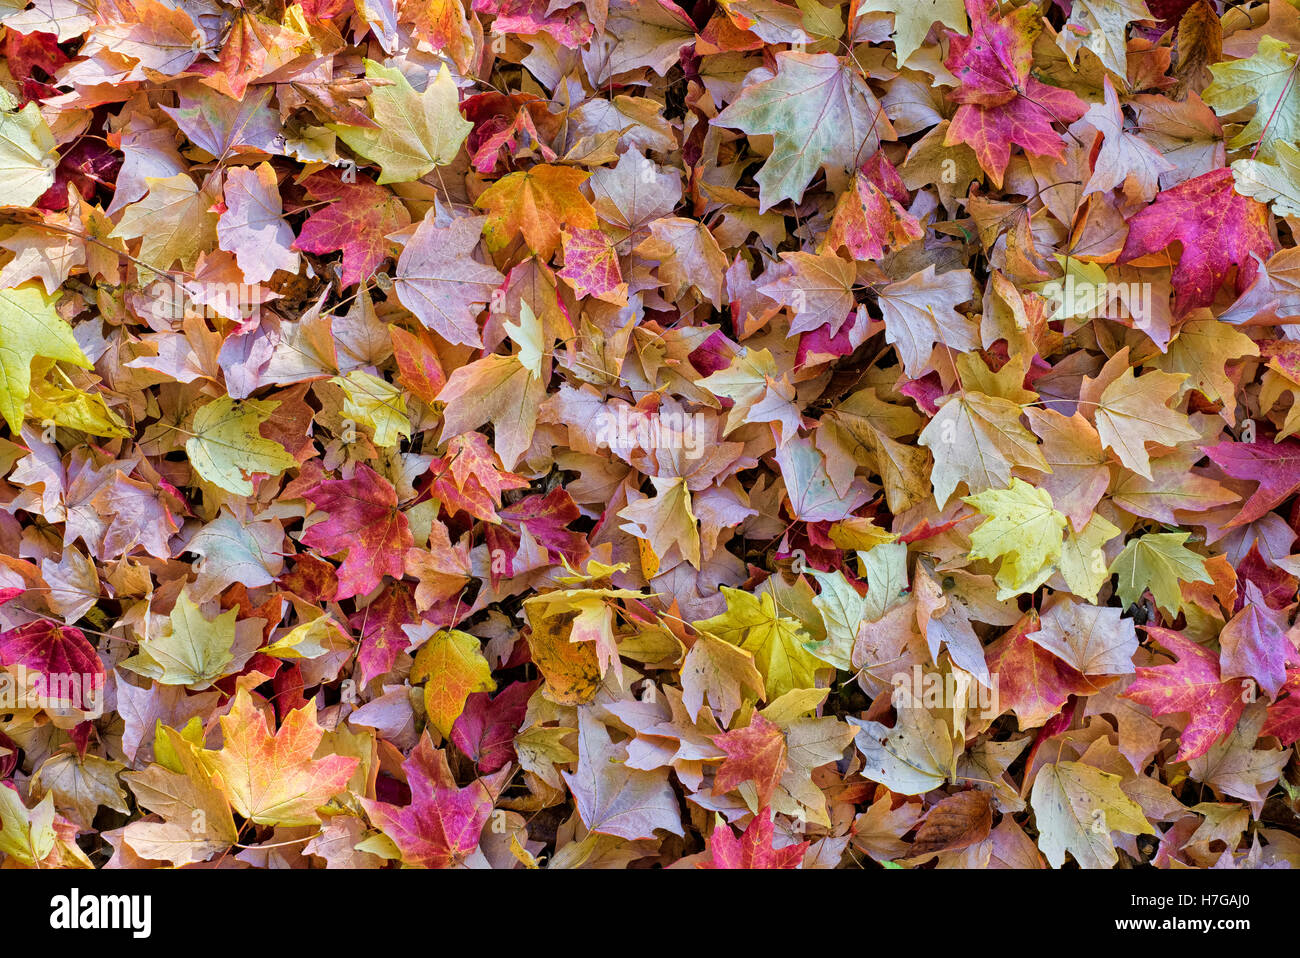 Colorful fallen Autumn leaves covering the ground. Stock Photo